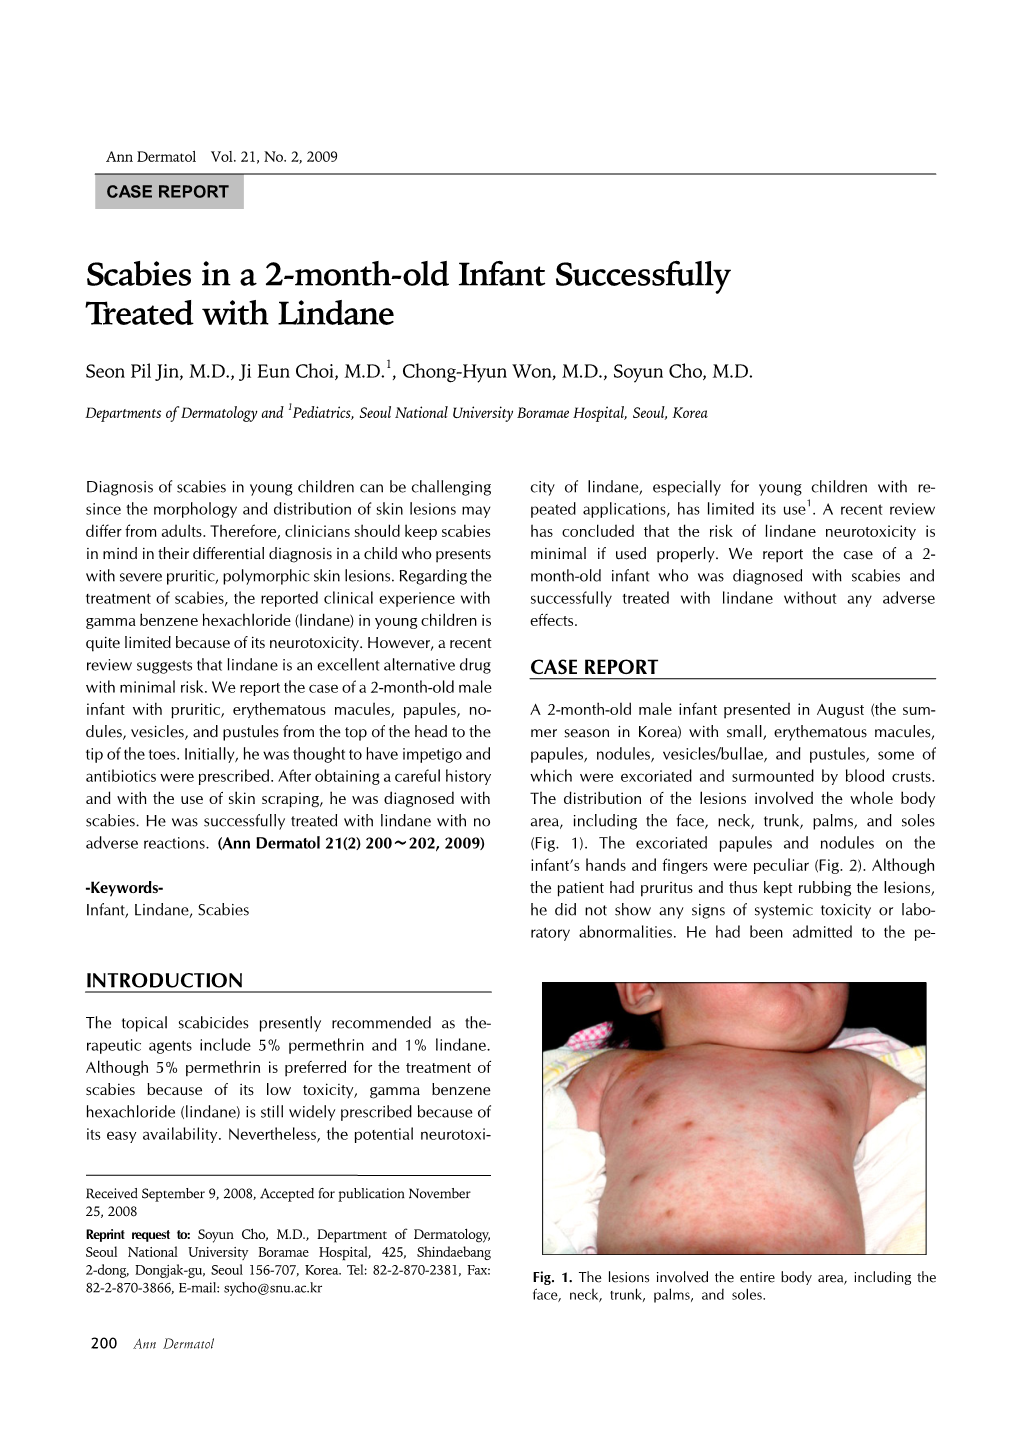 Scabies in a 2-Month-Old Infant Successfully Treated with Lindane